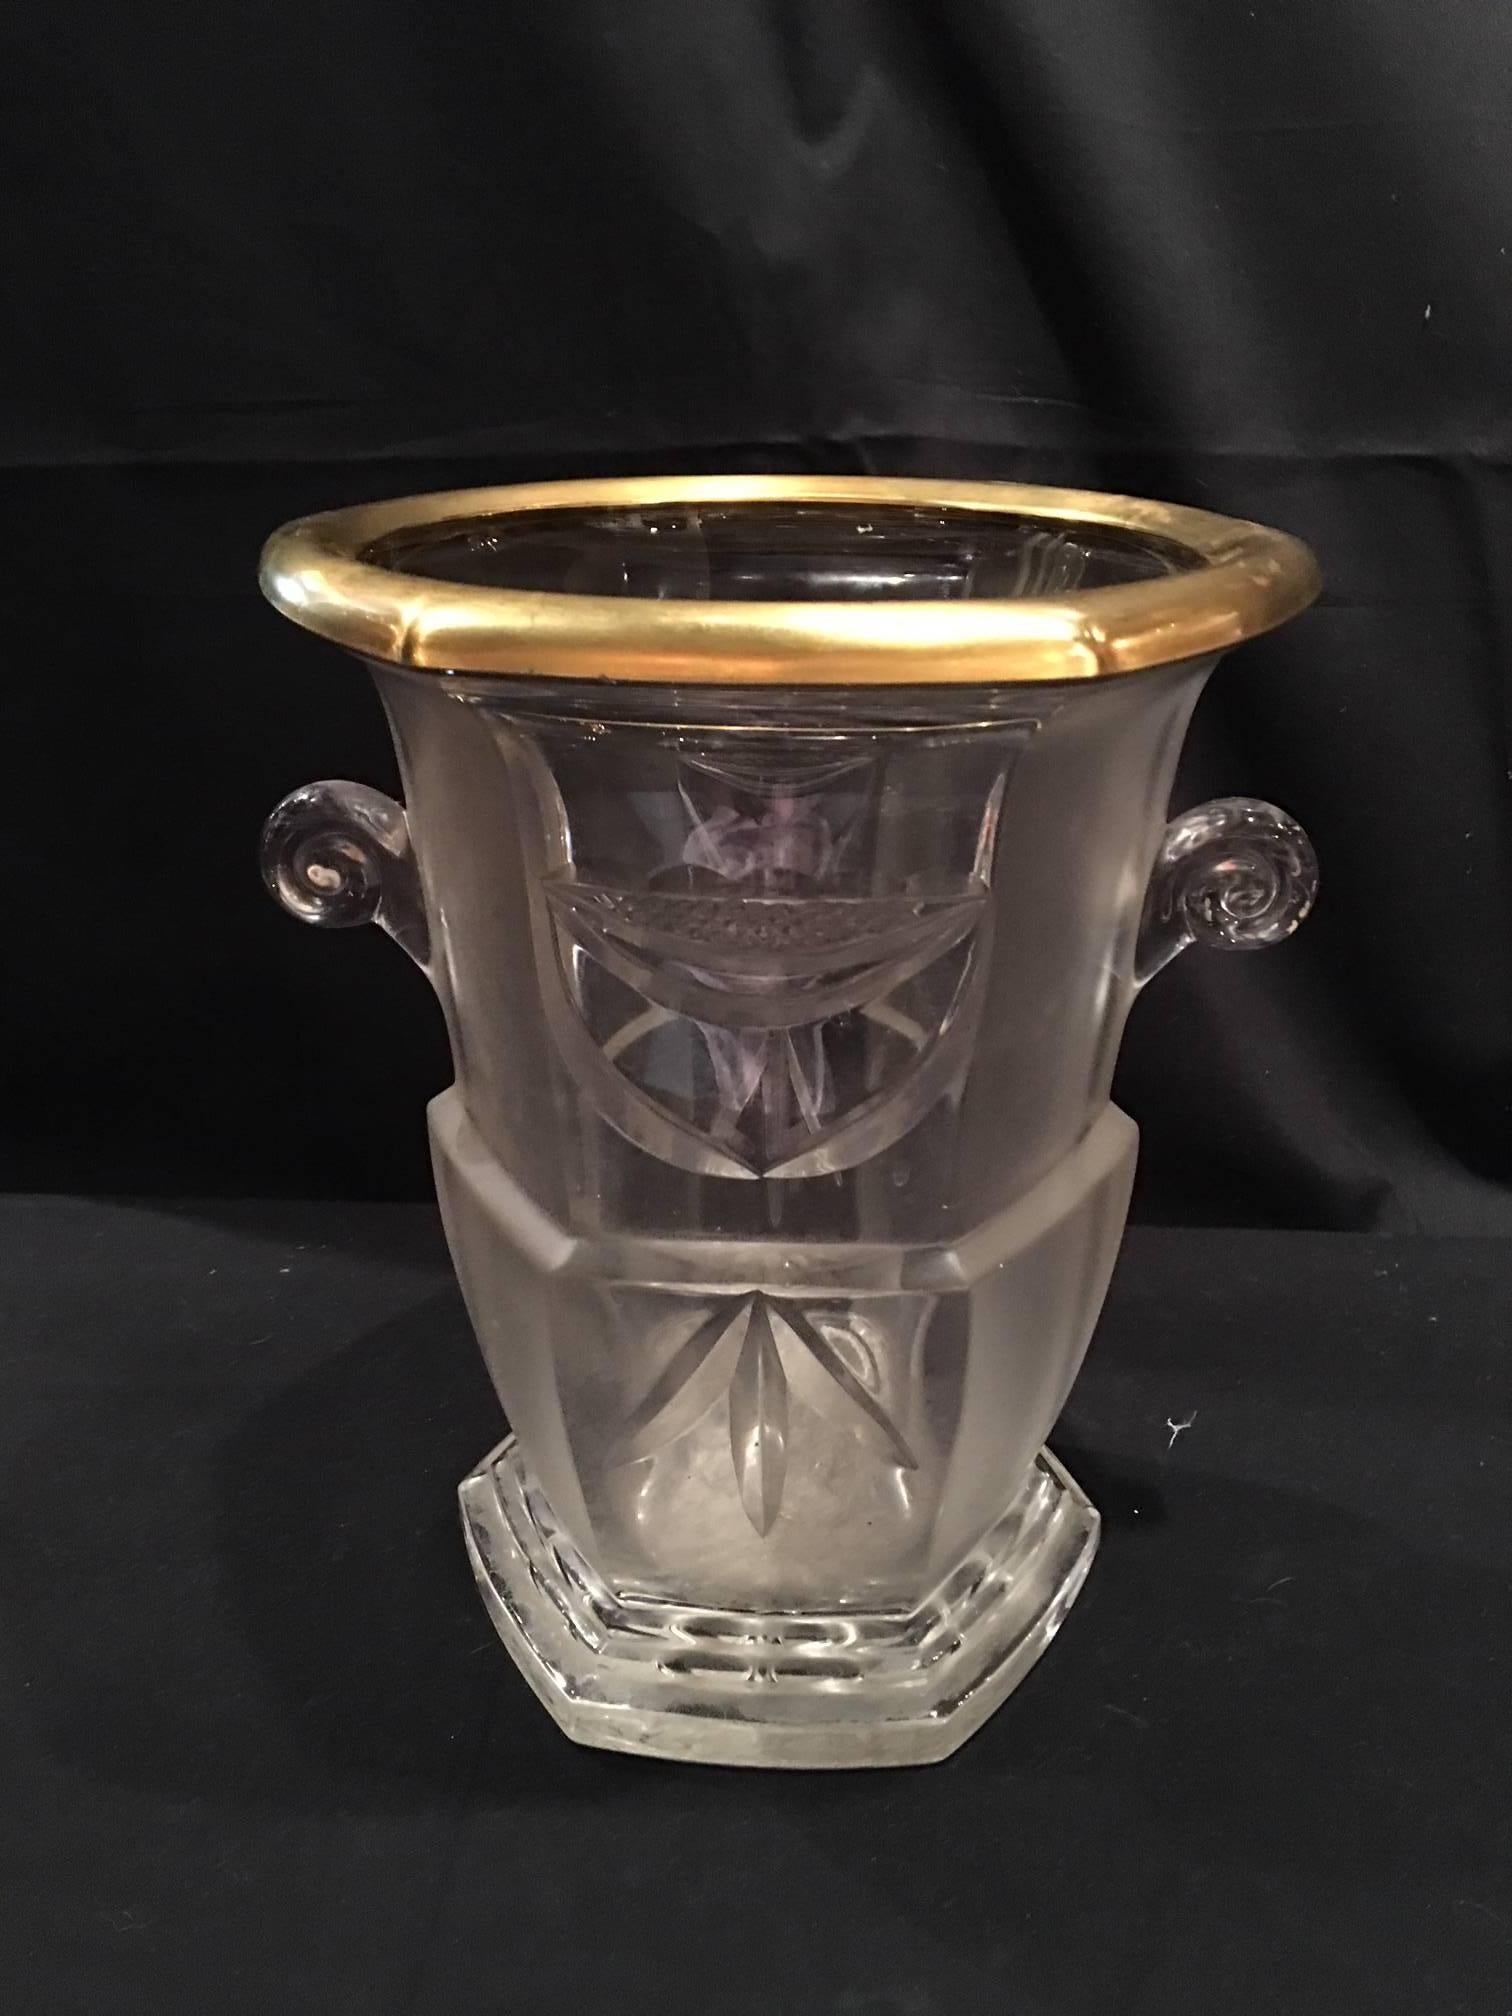 French cut-glass vase or ice bucket with a gilded rim, early 20th century.